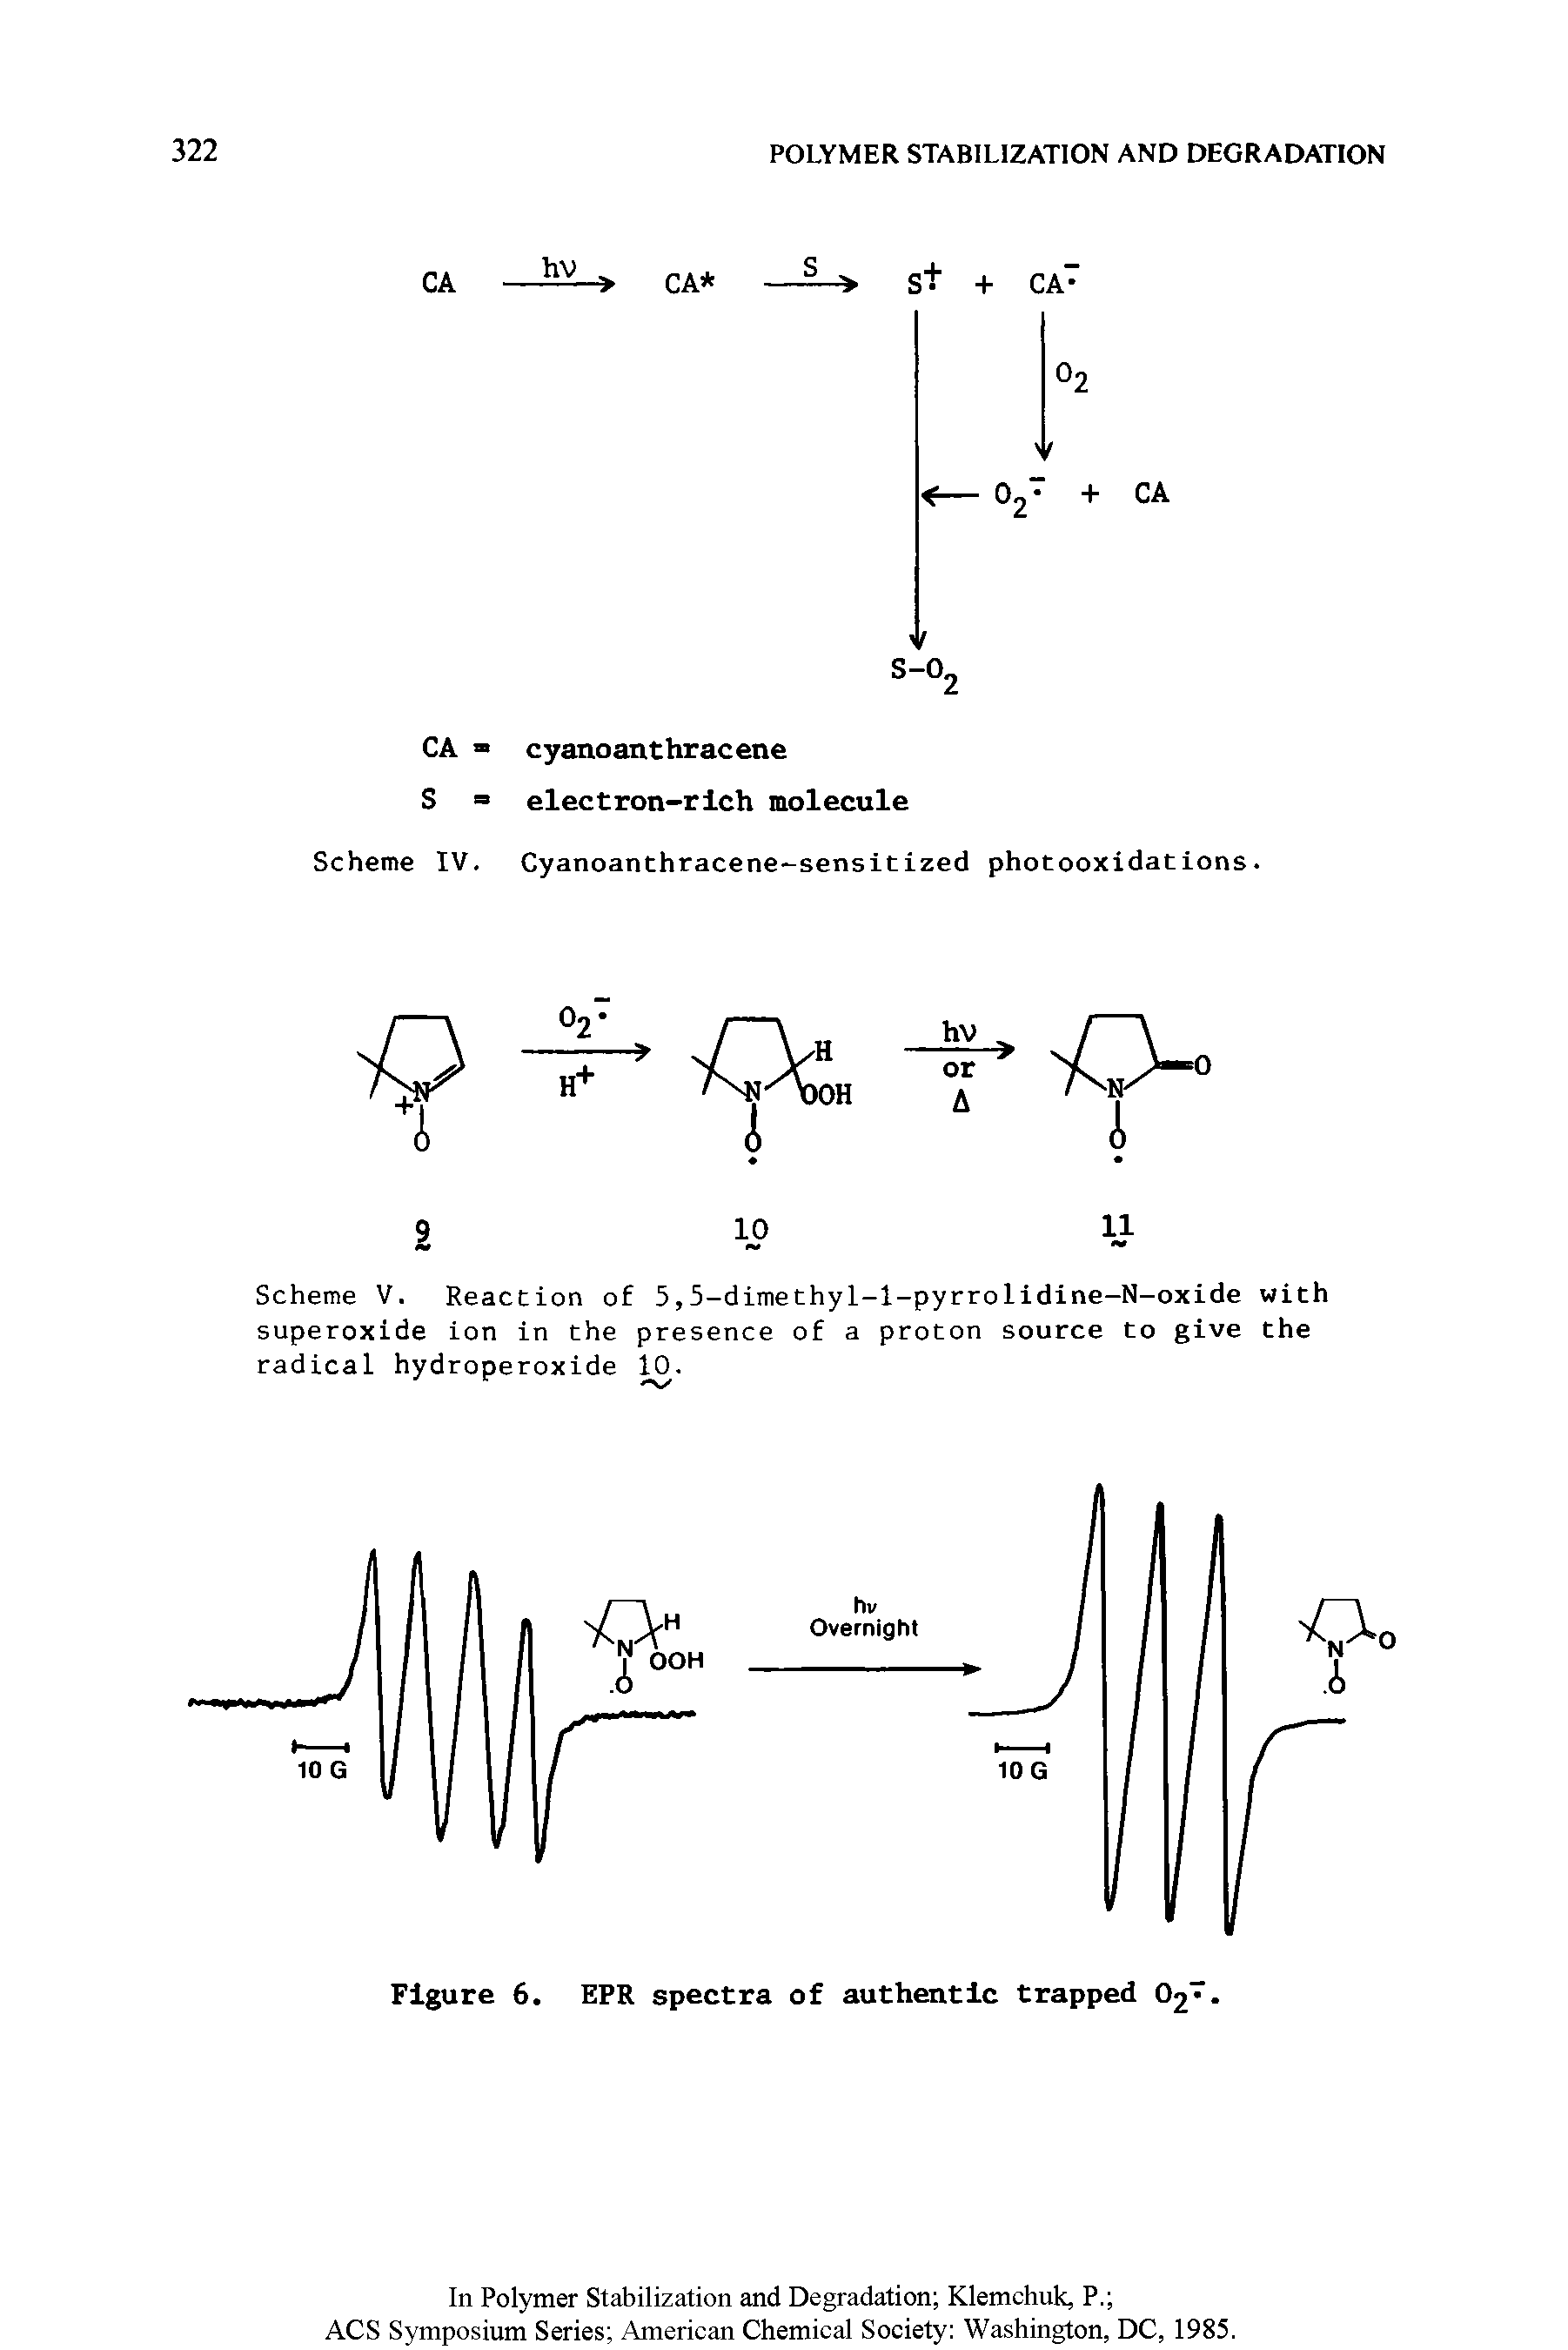 Scheme V. Reaction of 5,5-dimethyl-l-pyrrolidine-N-oxide superoxide ion in the presence of a proton source to give radical hydroperoxide 10. ...